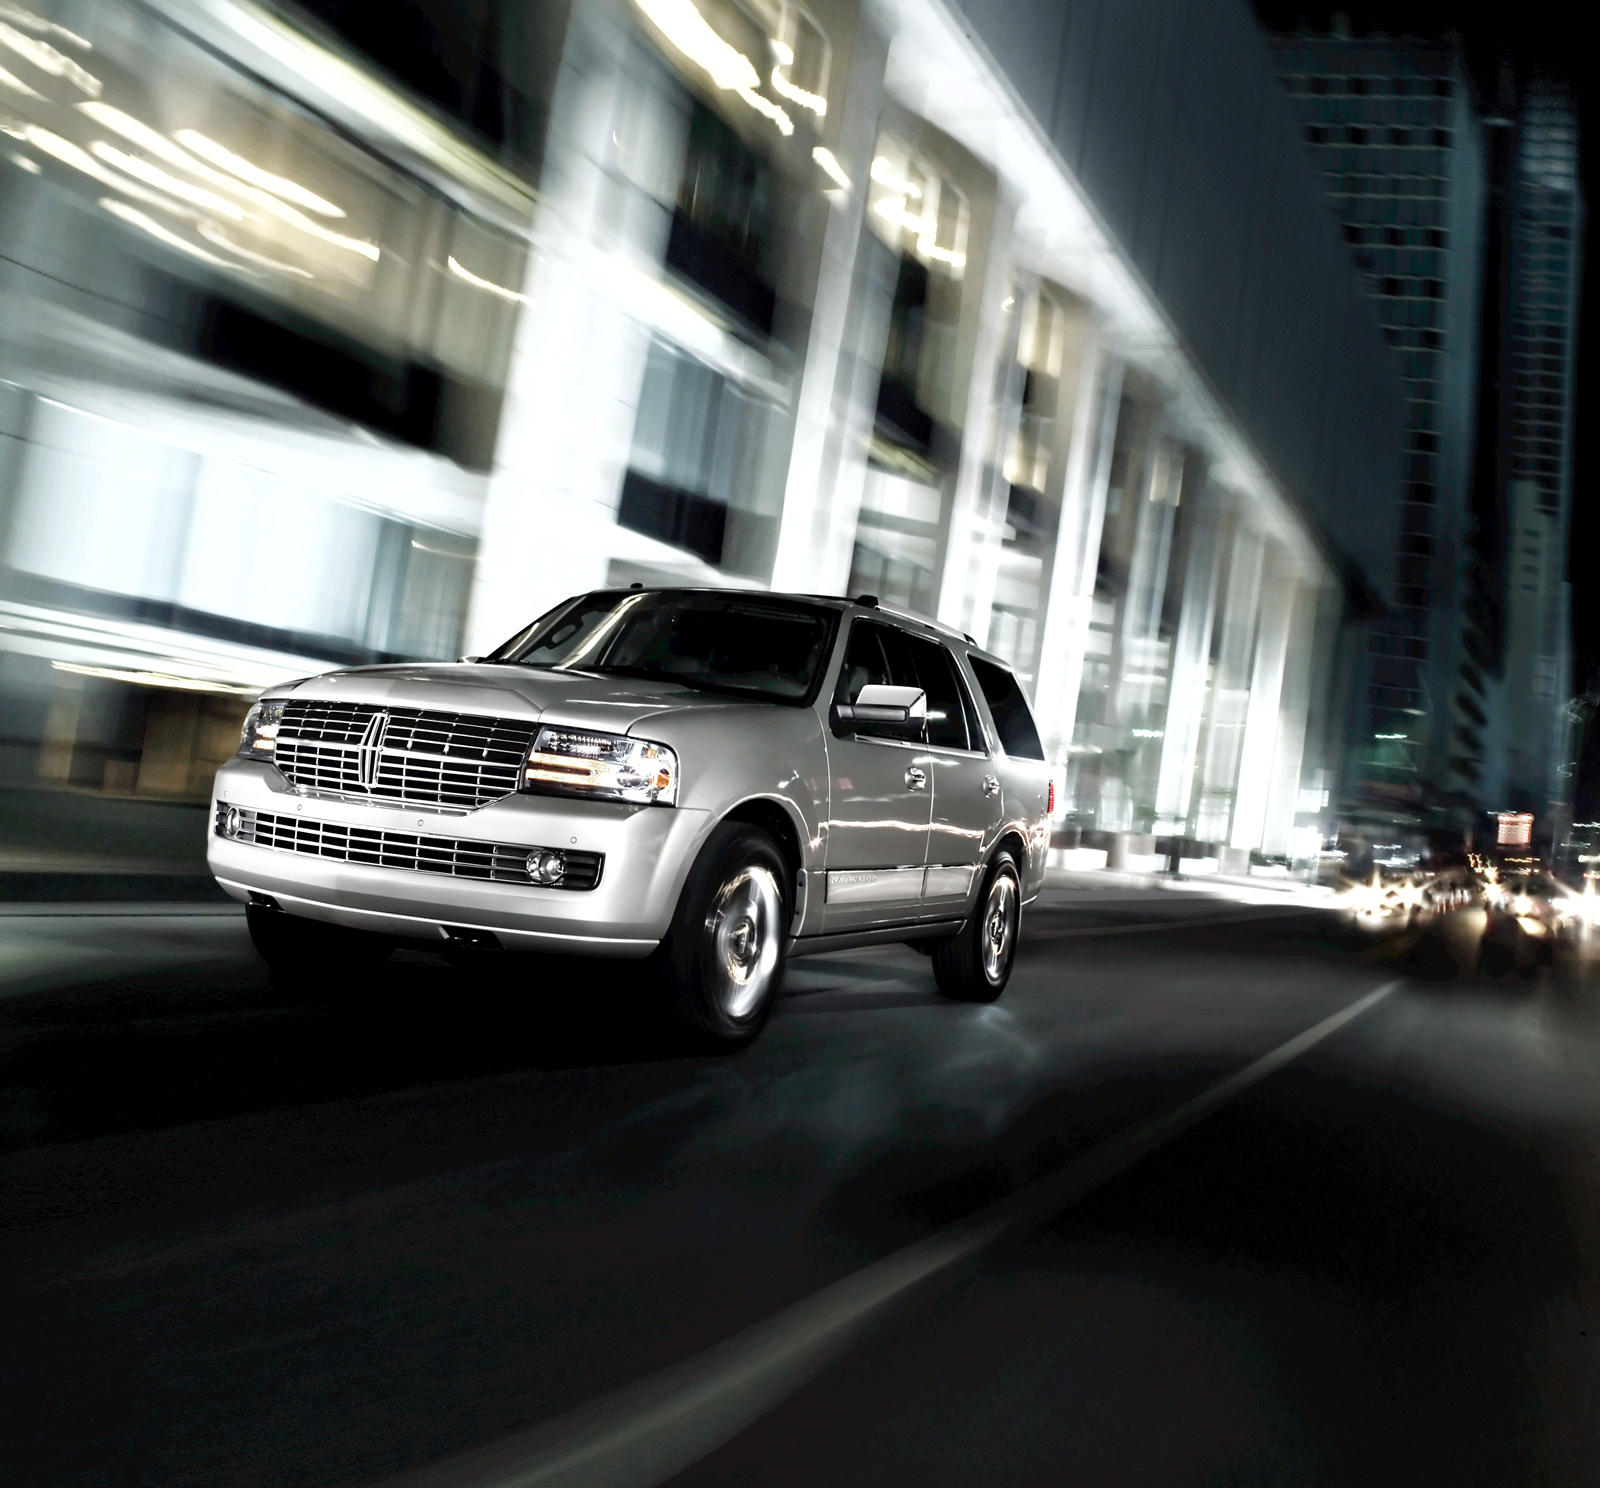 2009 Lincoln Navigator Front View Driving